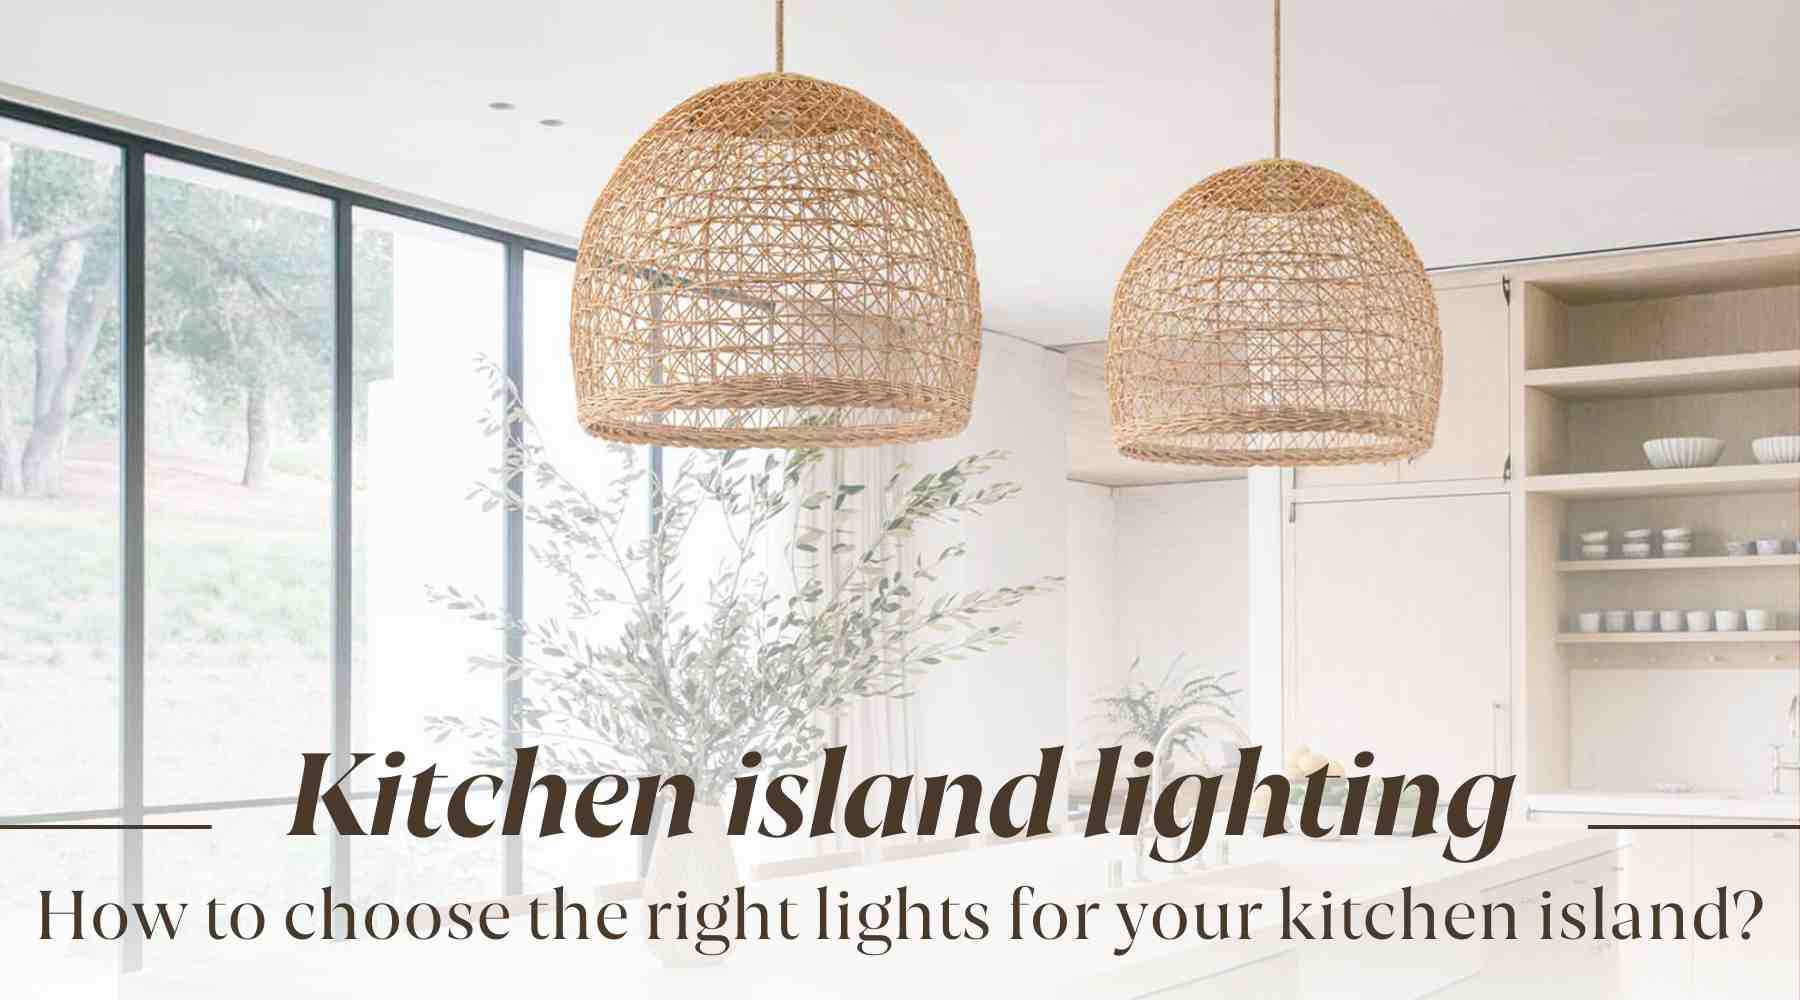 kitchen island lighting: How to choose the right lights for your kitchen island